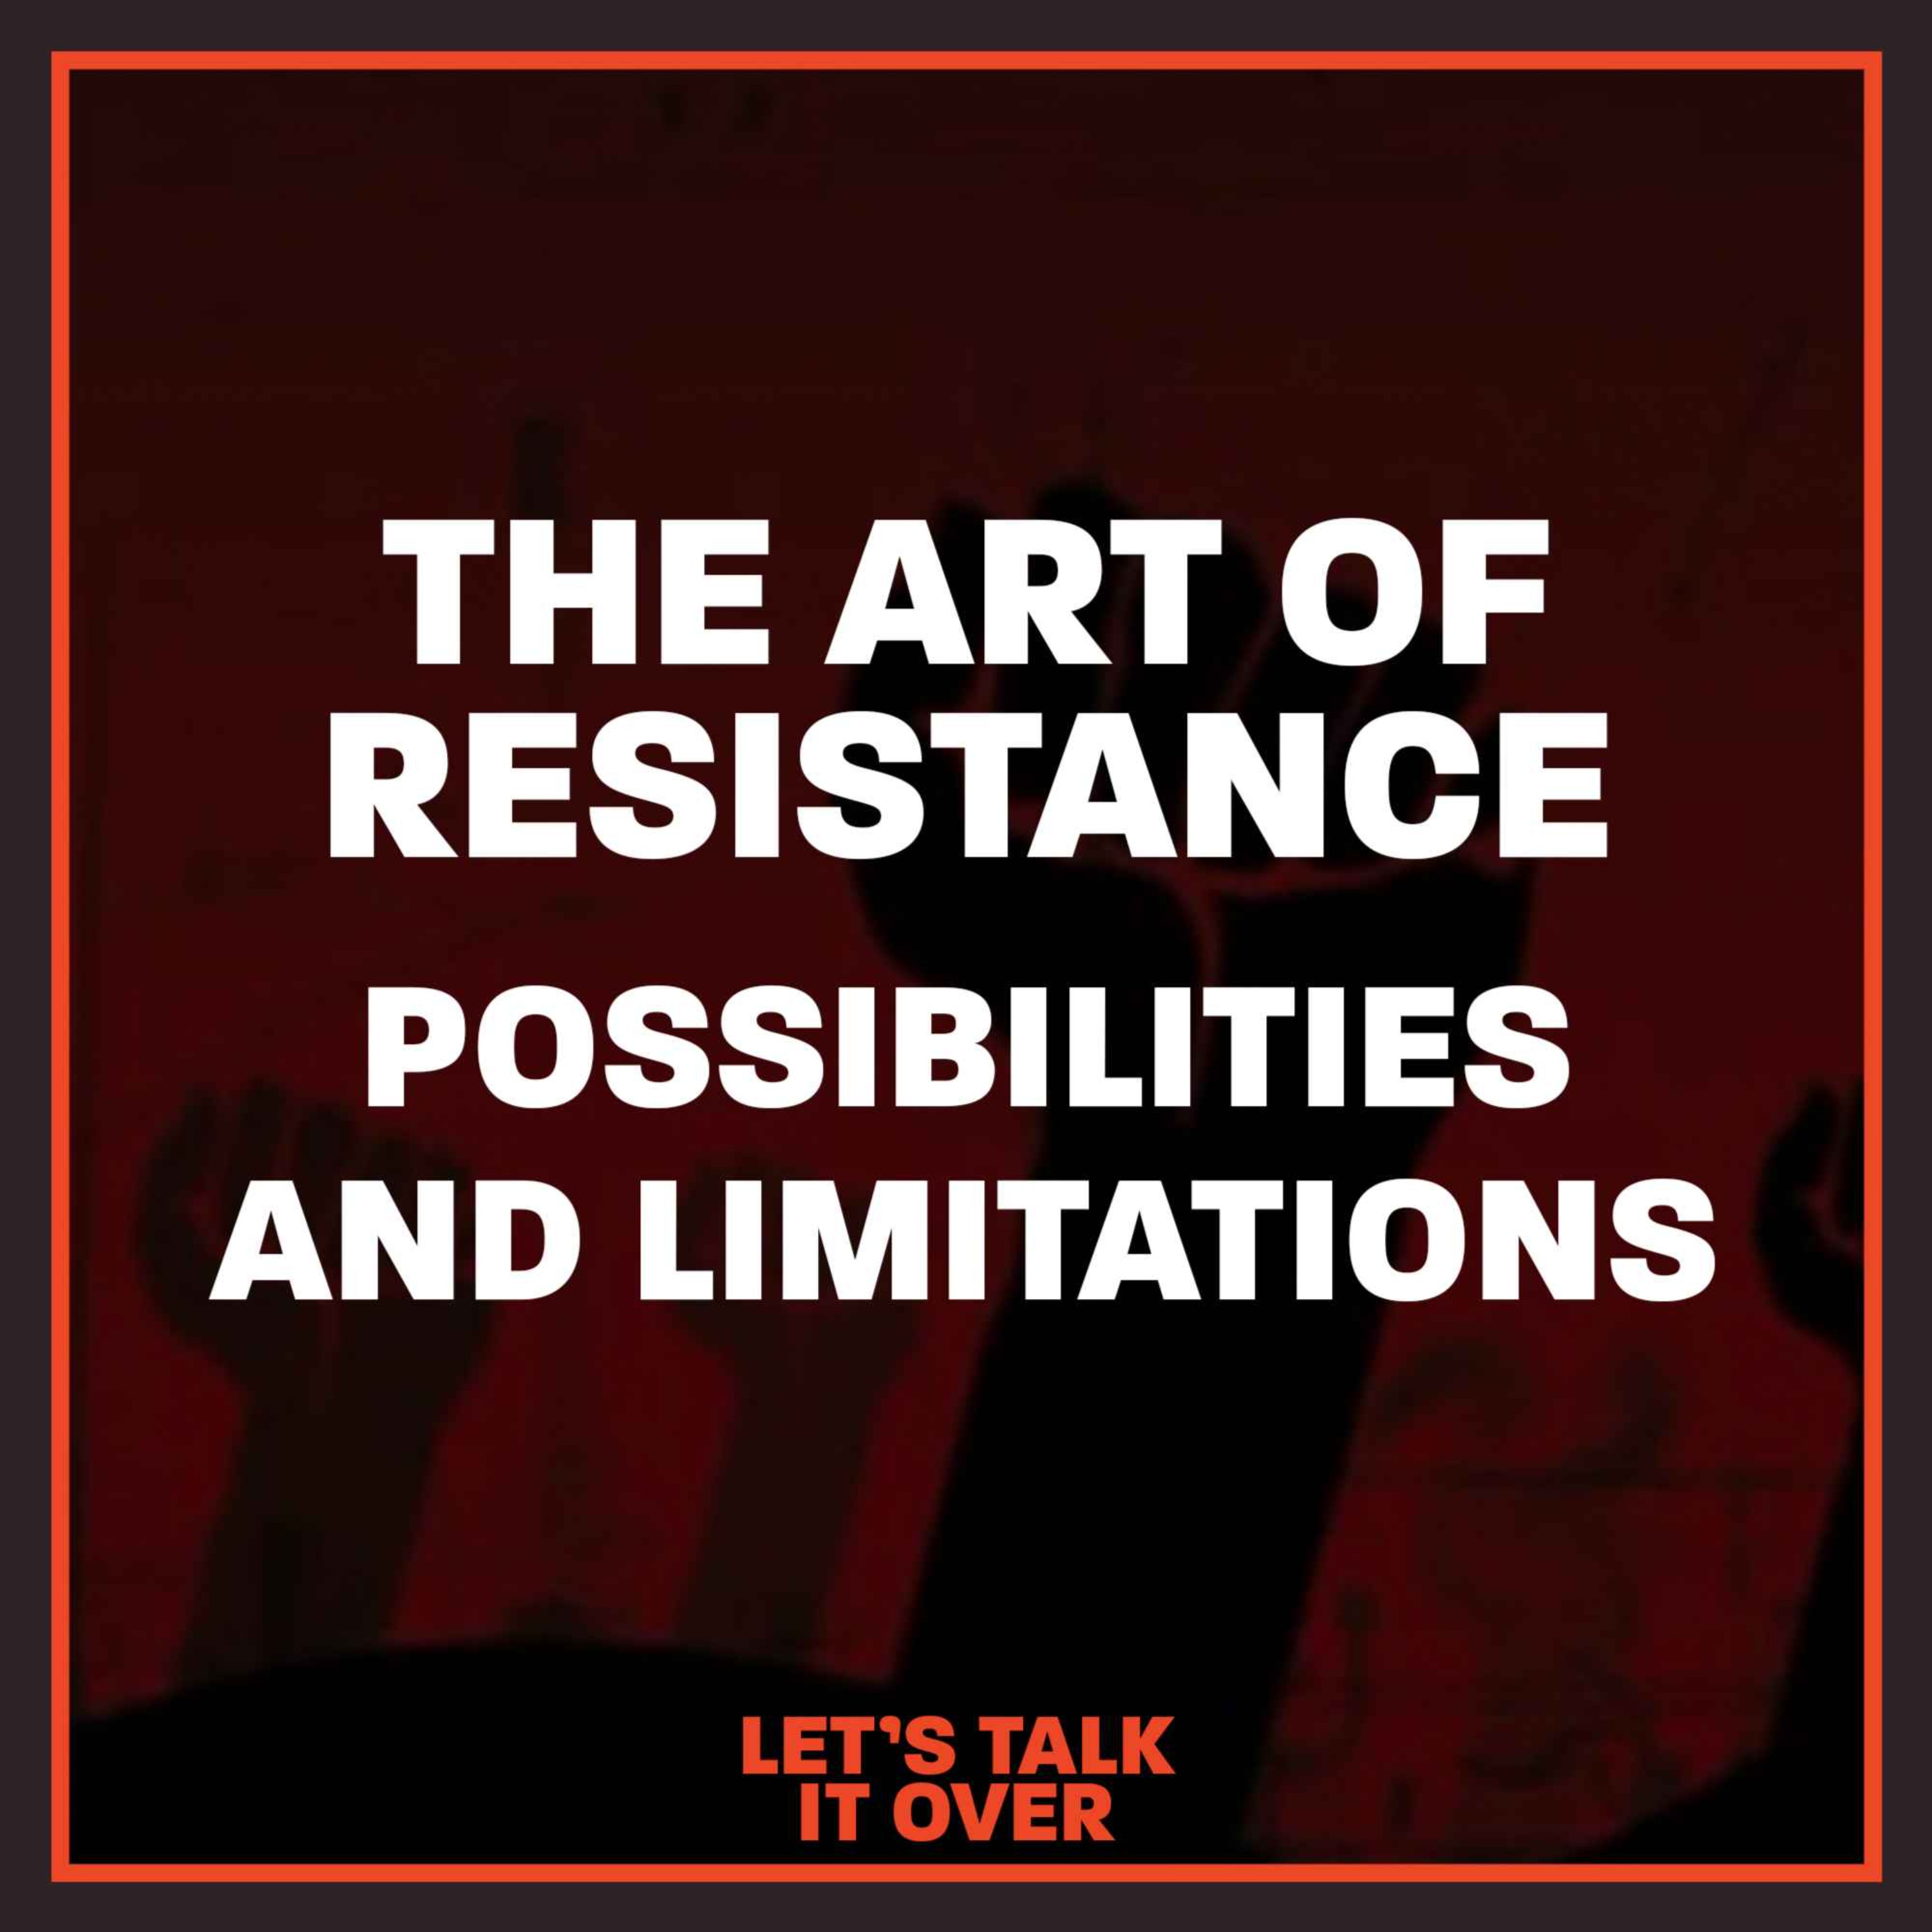 The Art of Resistance, possibilities and limitations